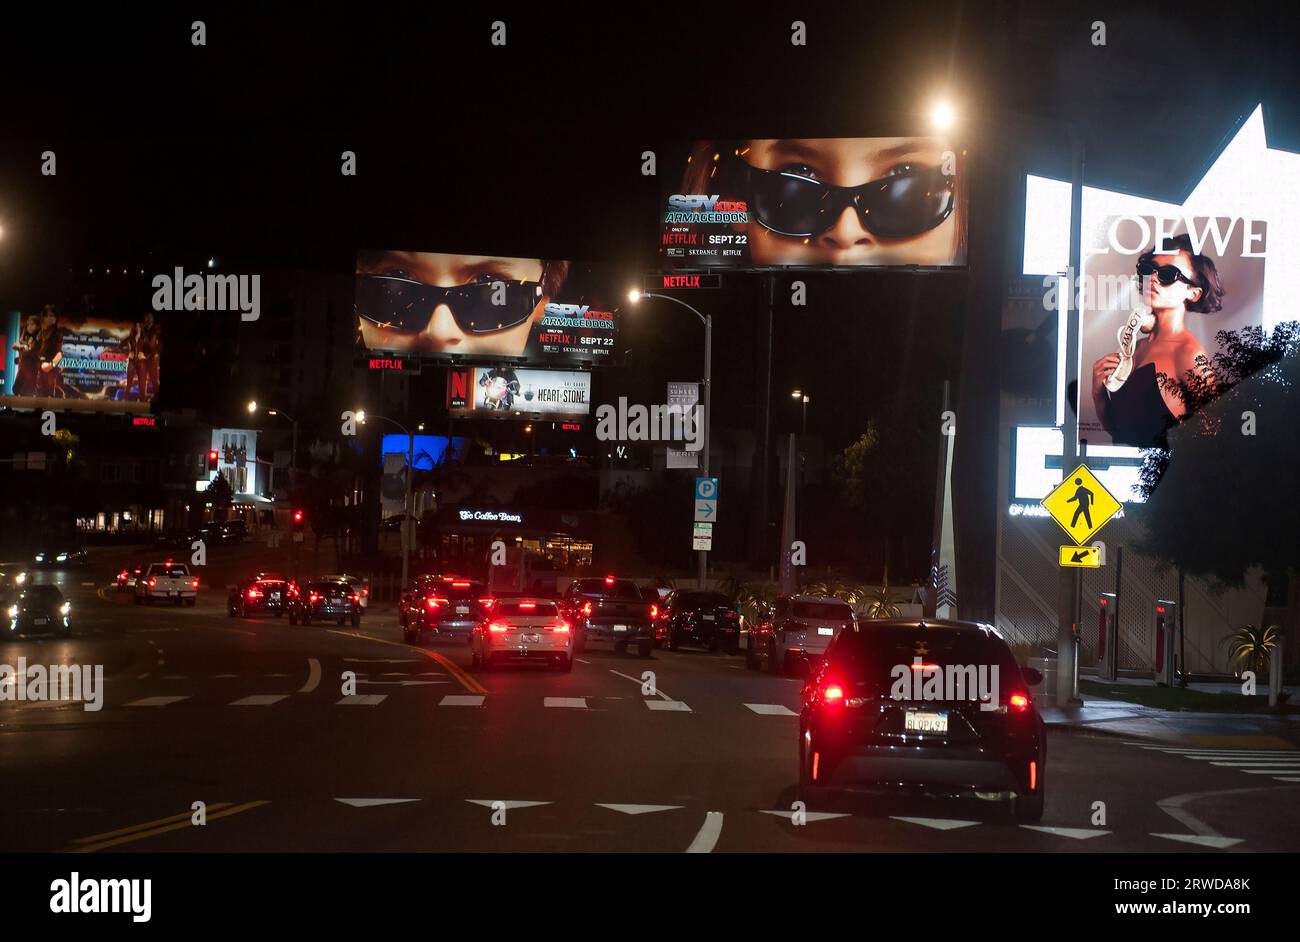 Photo taken through windshield of car driving on the Sunset Strip showing Netflix dominance of the billboards located there in Los Angeles, CA. Stock Photo